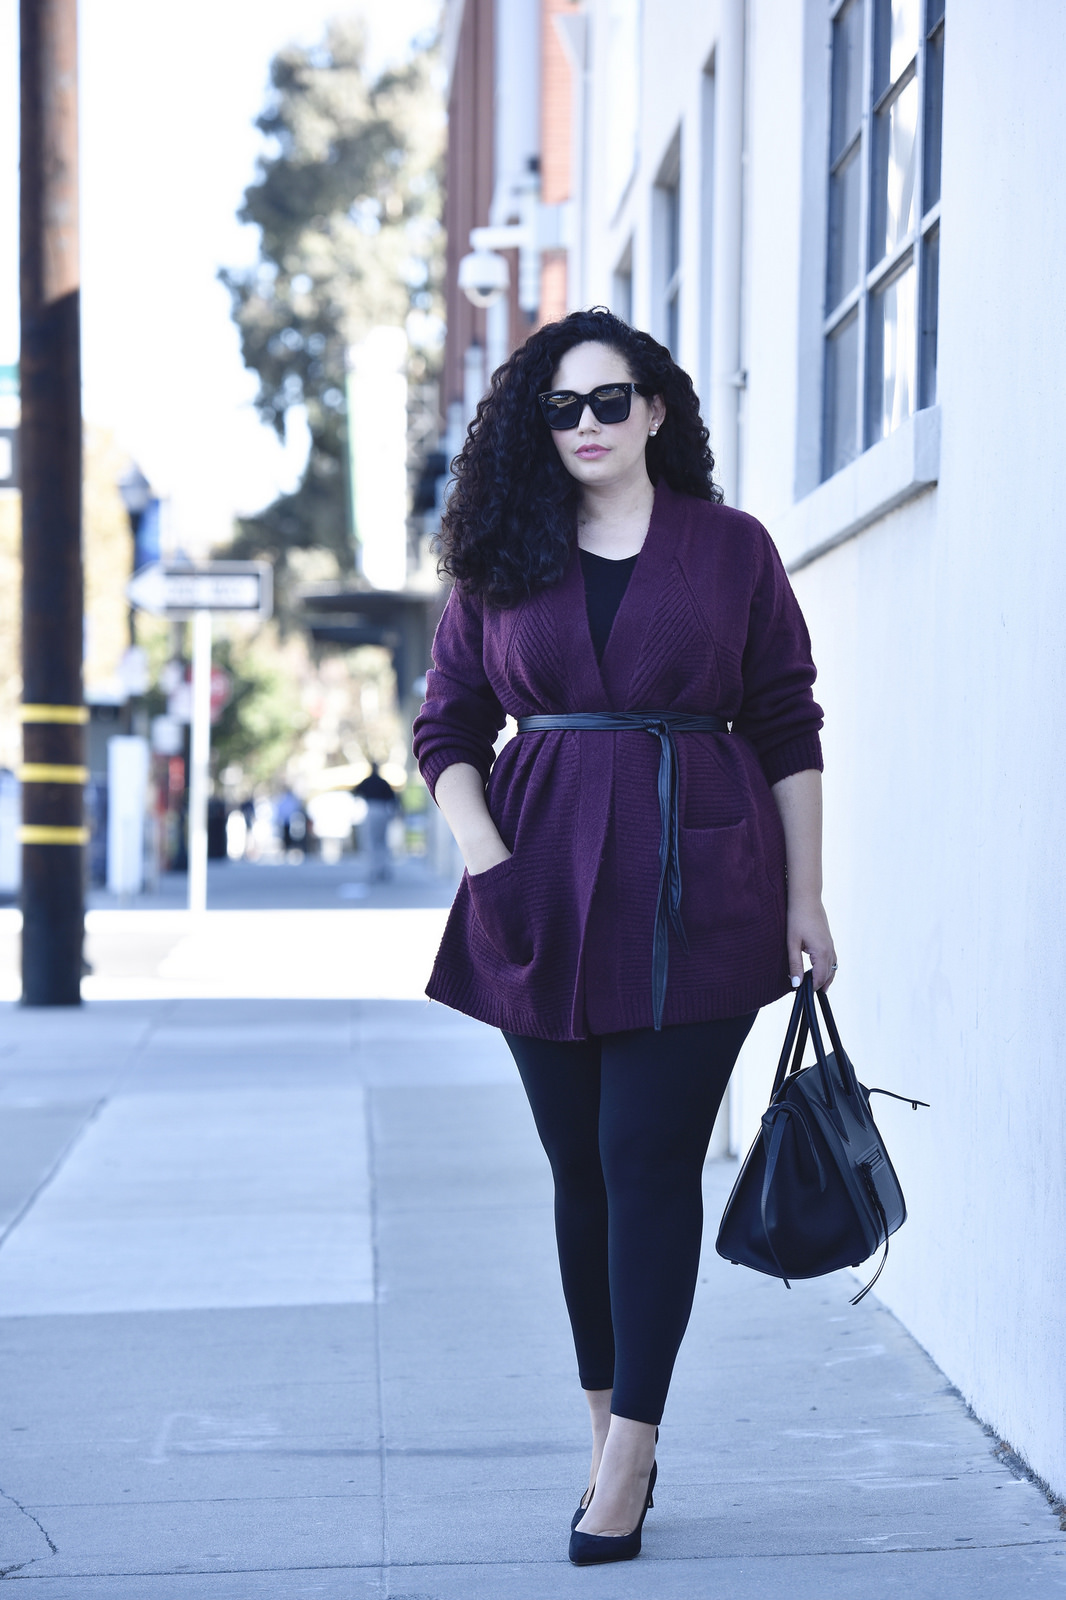 How I'm Styling Sweaters This Season Via @GirlWithCurves #celine